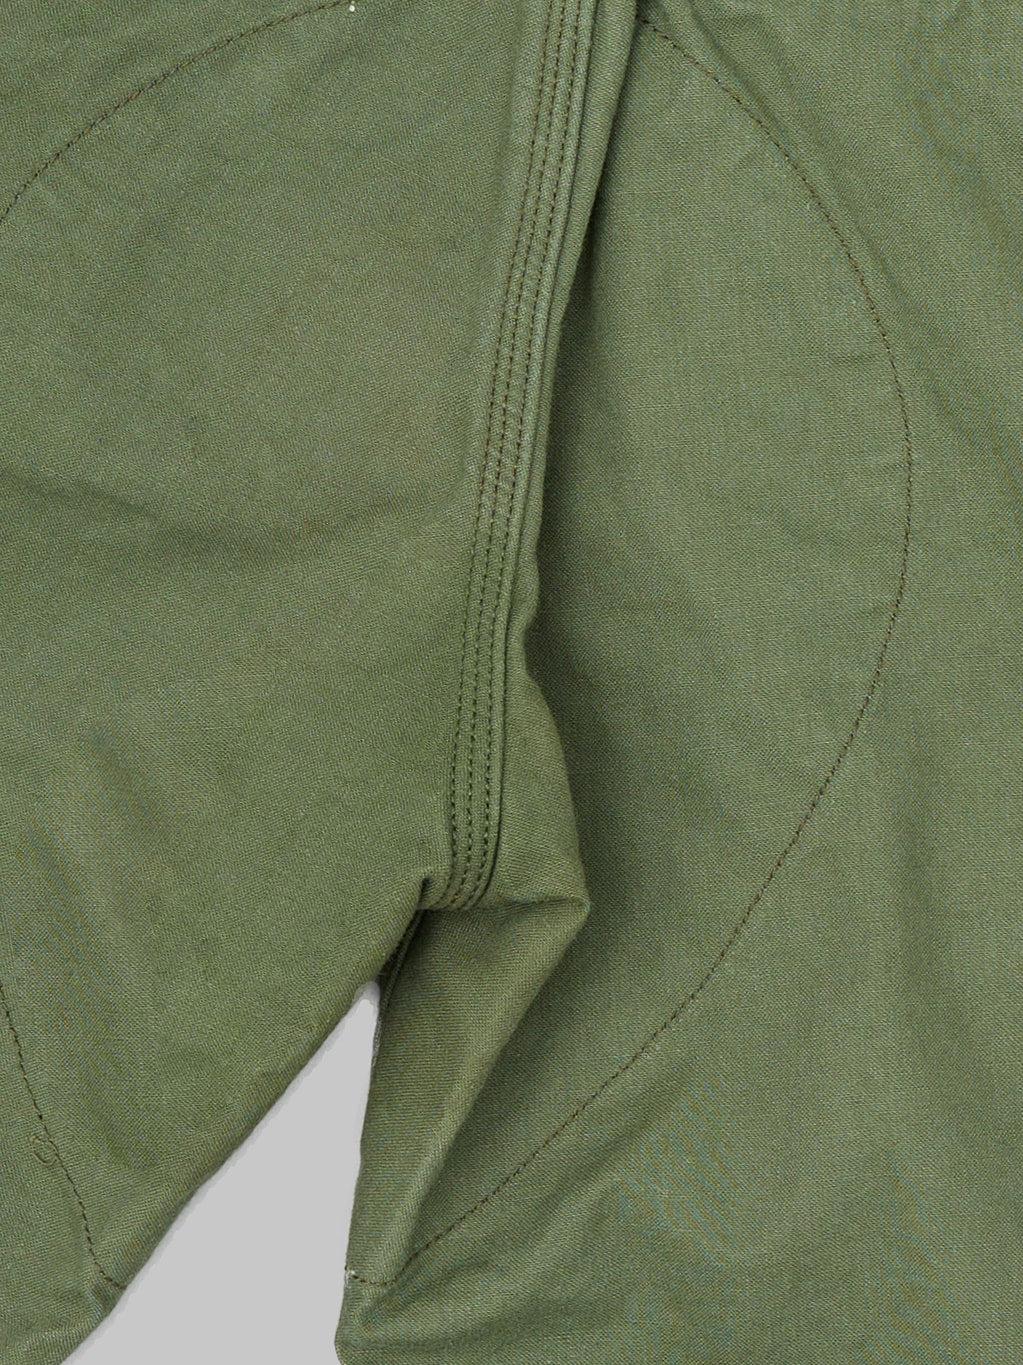 UES Duck Canvas Short Pants Olive stitching